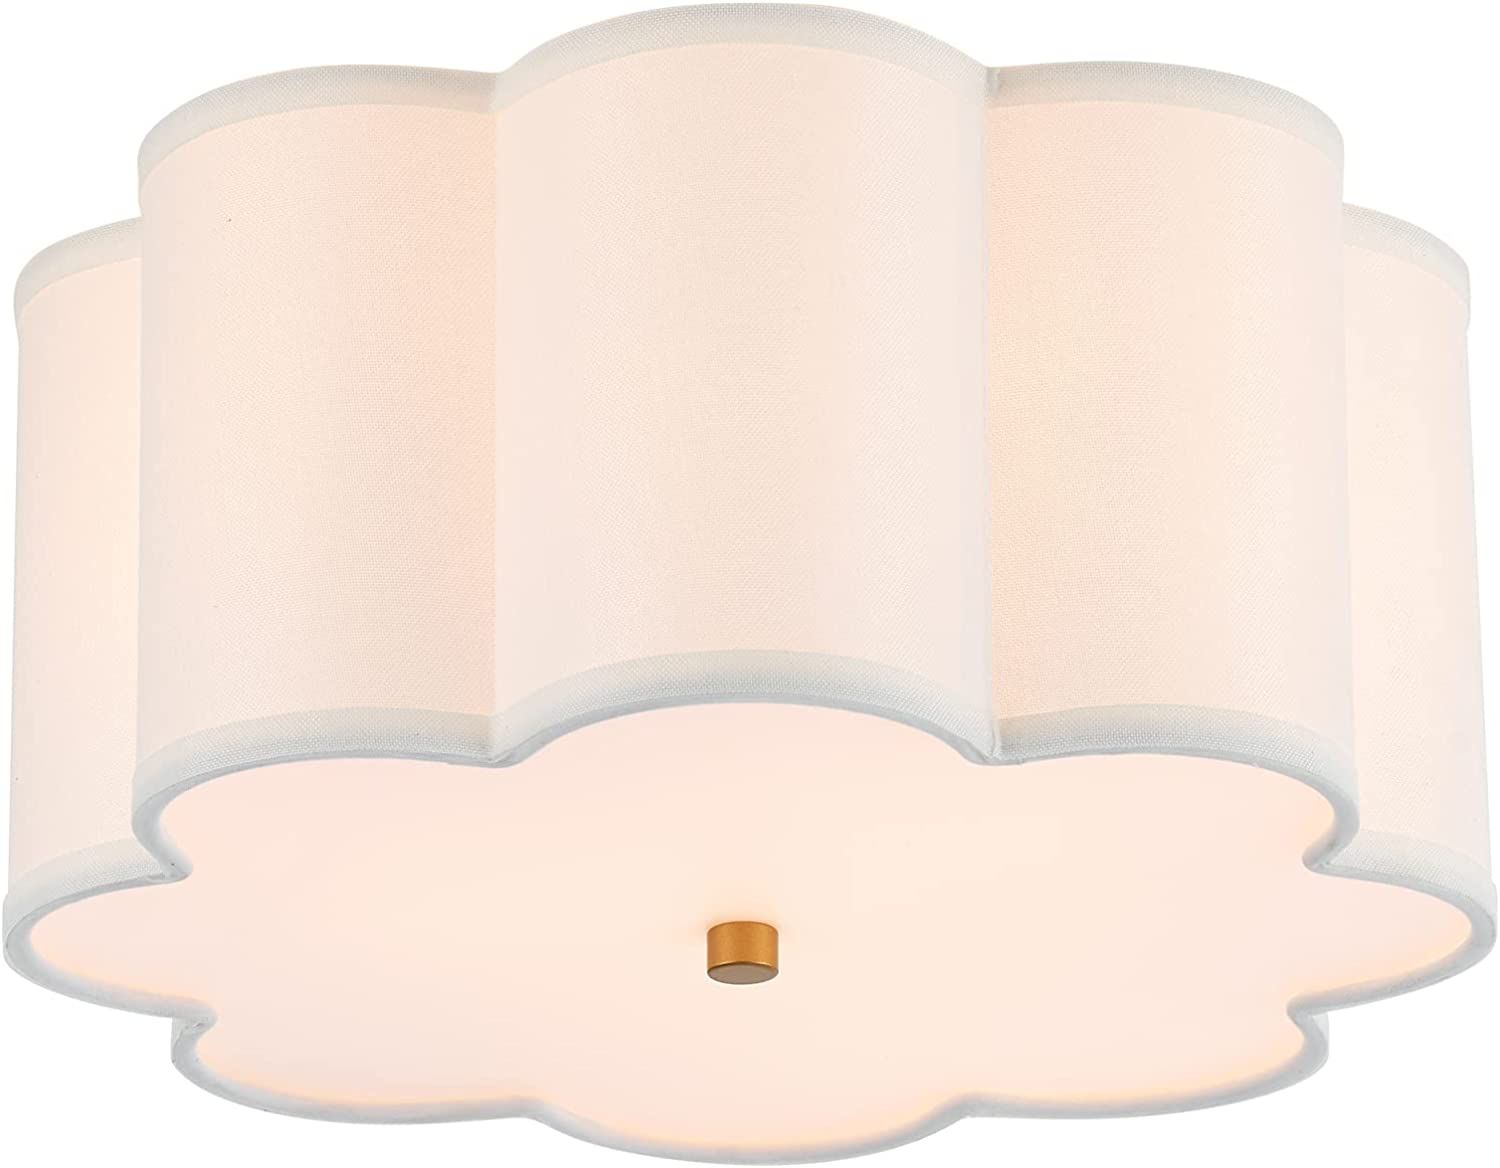 Semi Flush Mount Ceiling Light Fixture, Modern Close to Ceiling Lamp with Cream White Fabric Drum... | Amazon (US)